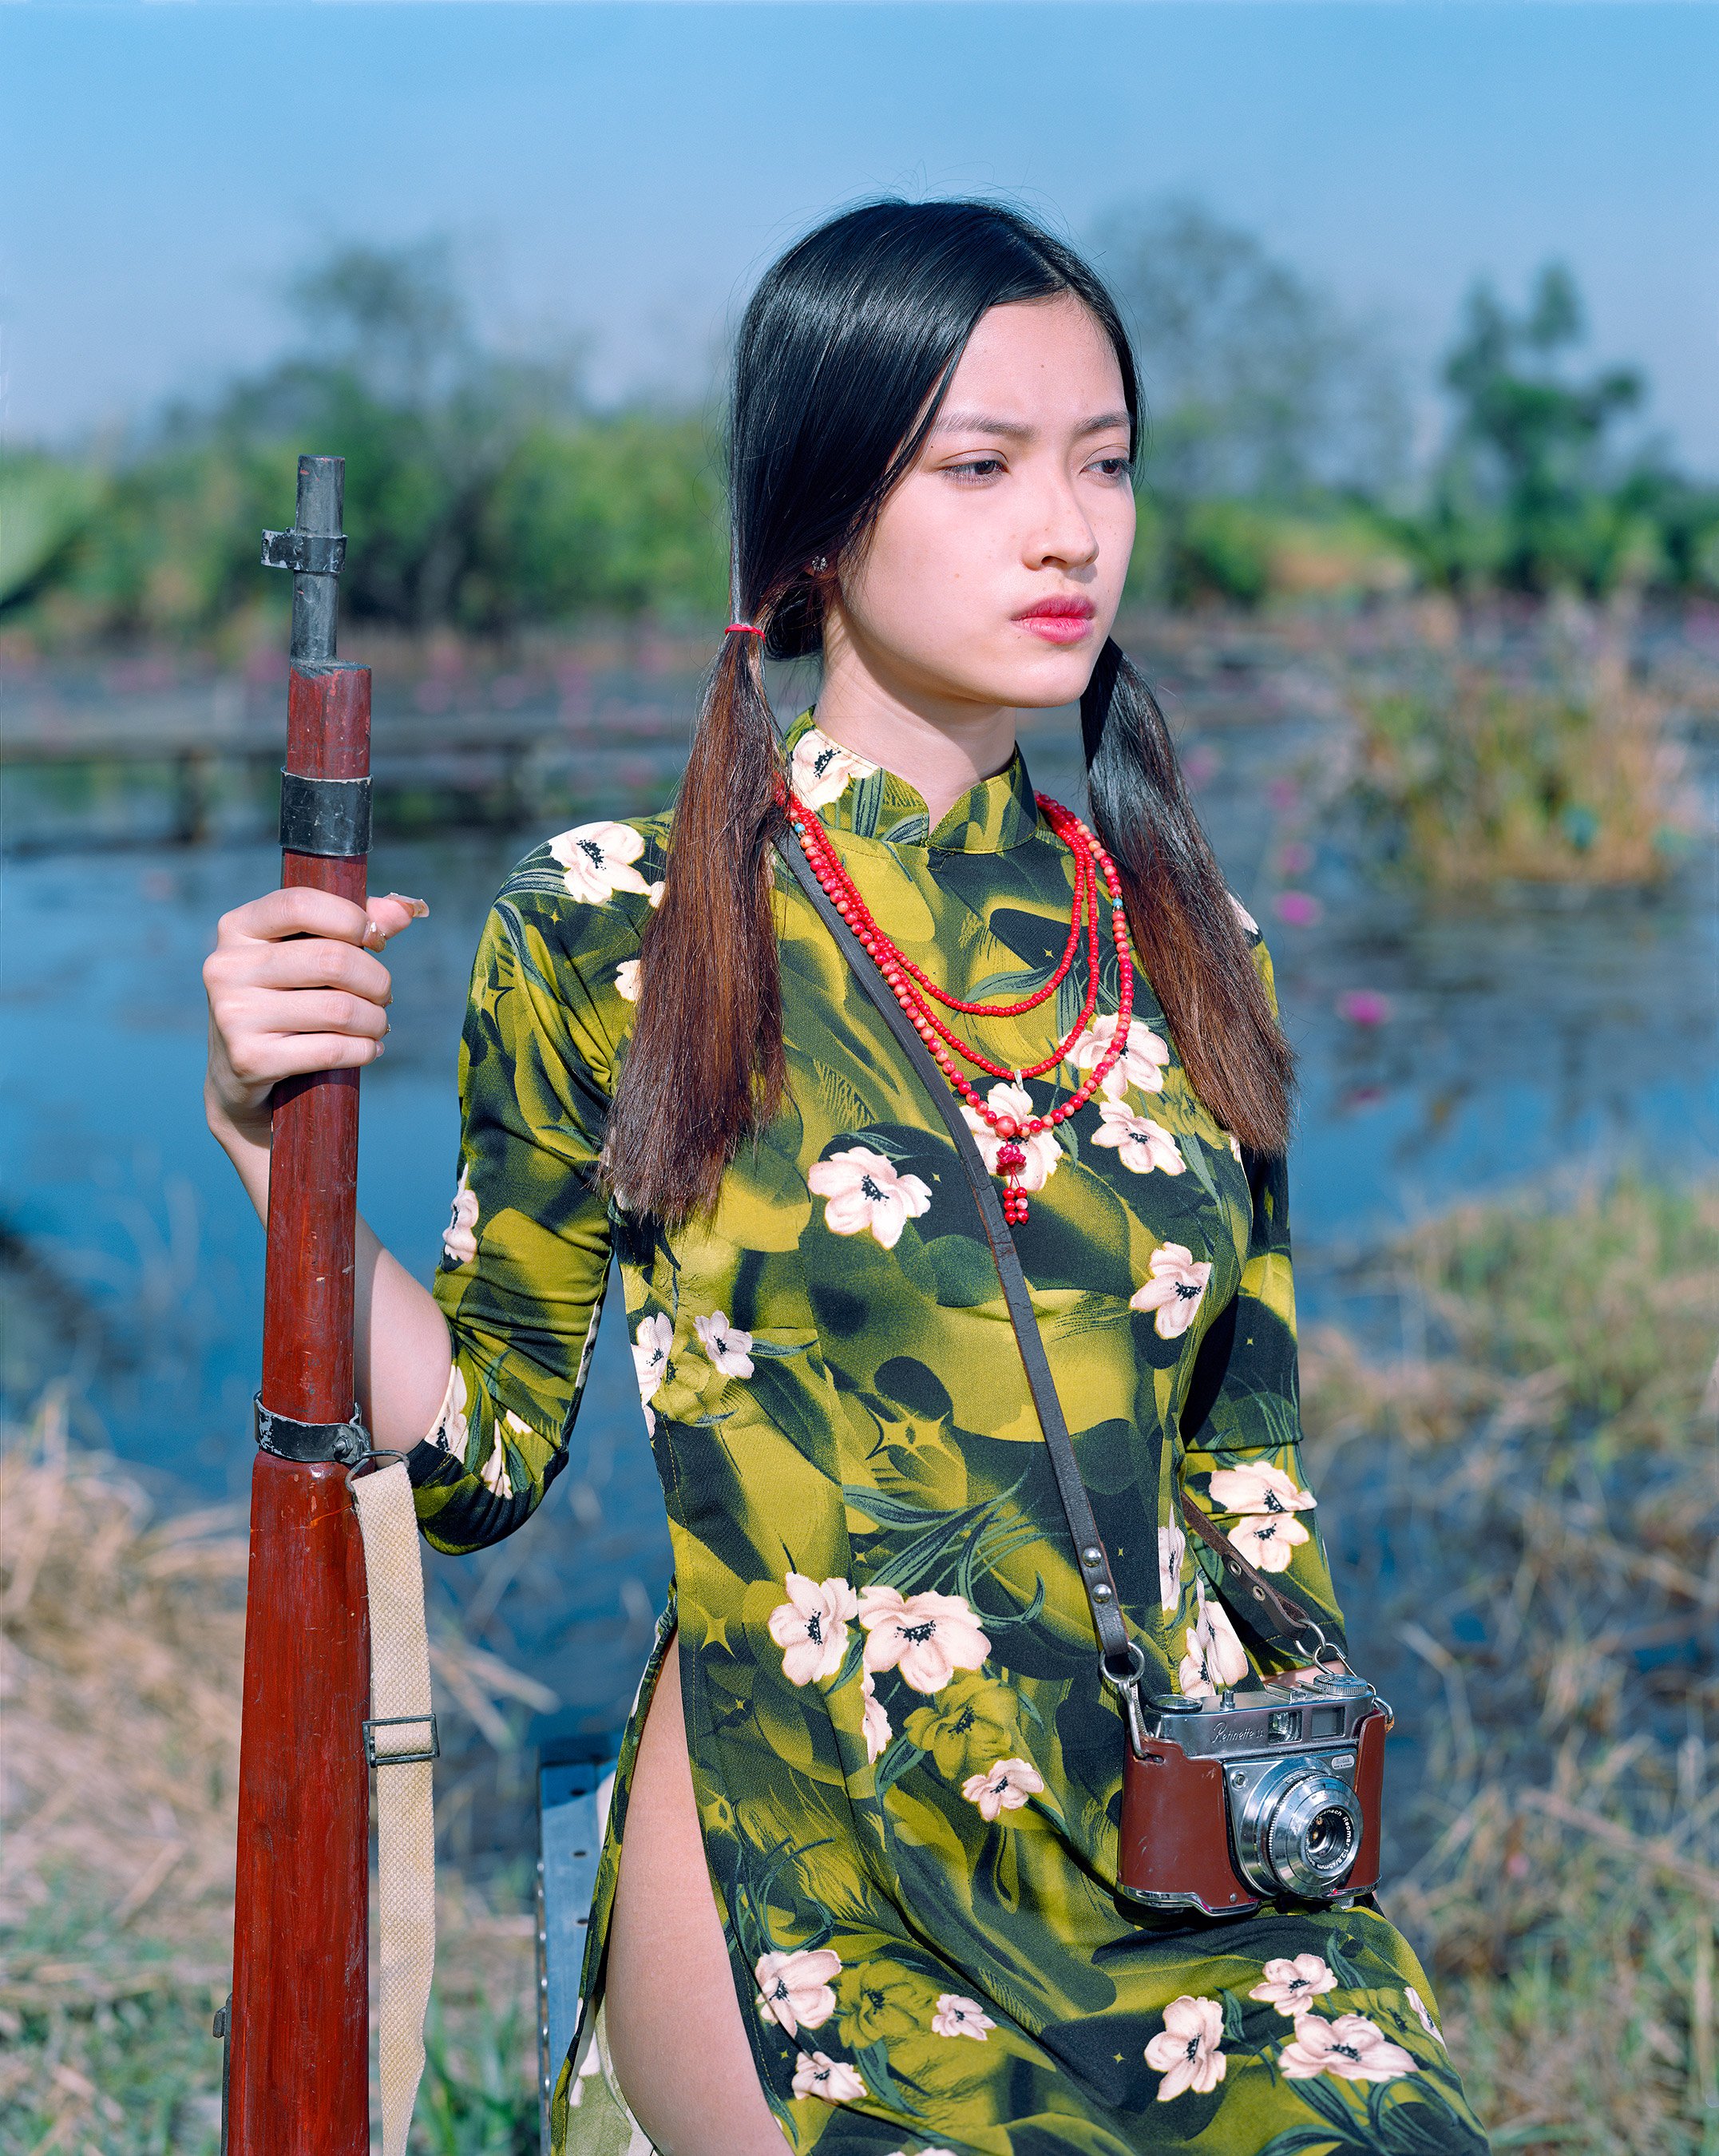   Sis{Quynh},   from the '{City of Virgins}' series. sRGB1966 (Collection de l'artiste)101.6 x 76.20 cm.(30 x 40 inch.) 